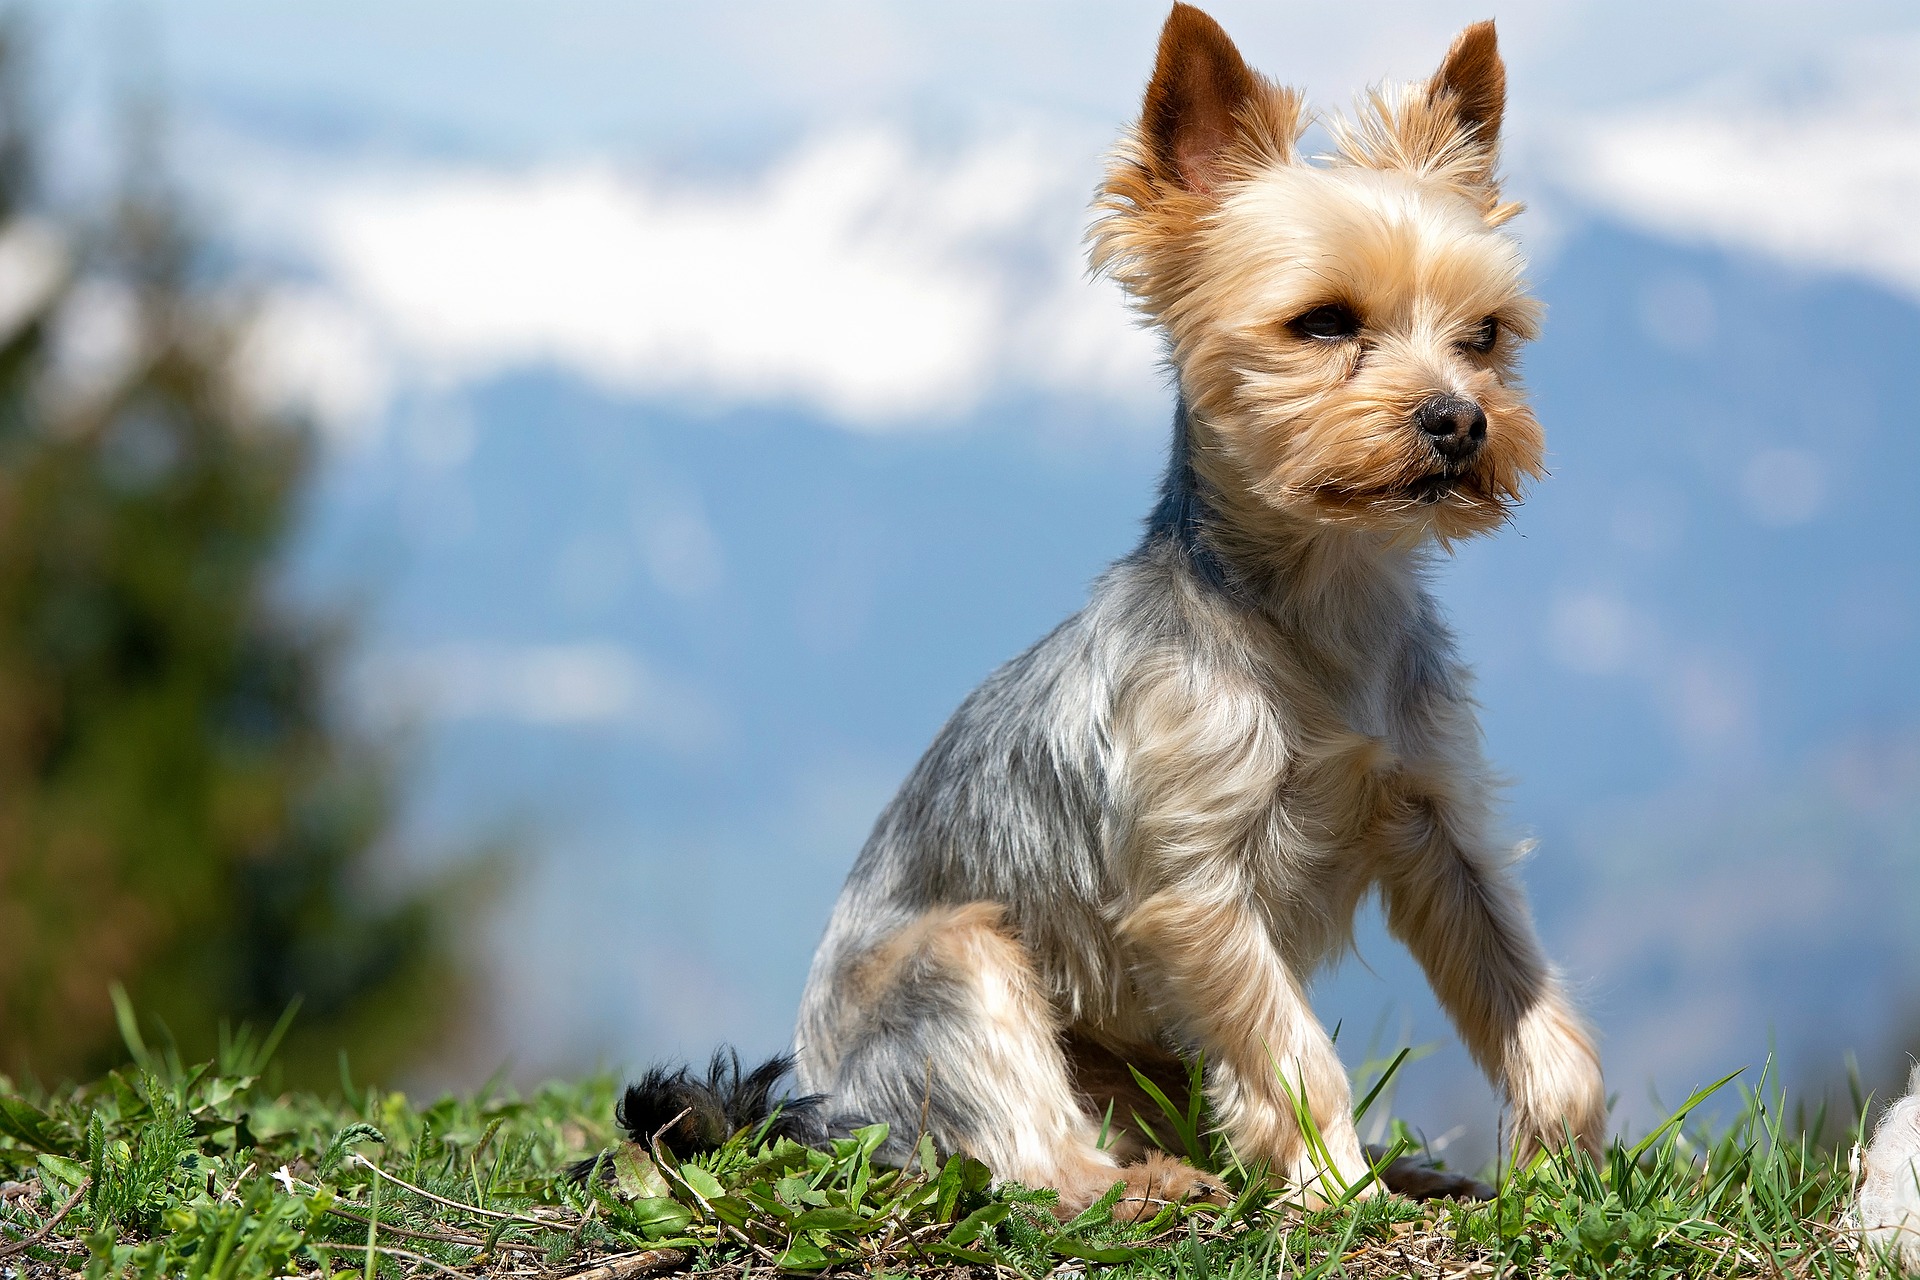 5 ways to train a Yorkie to come